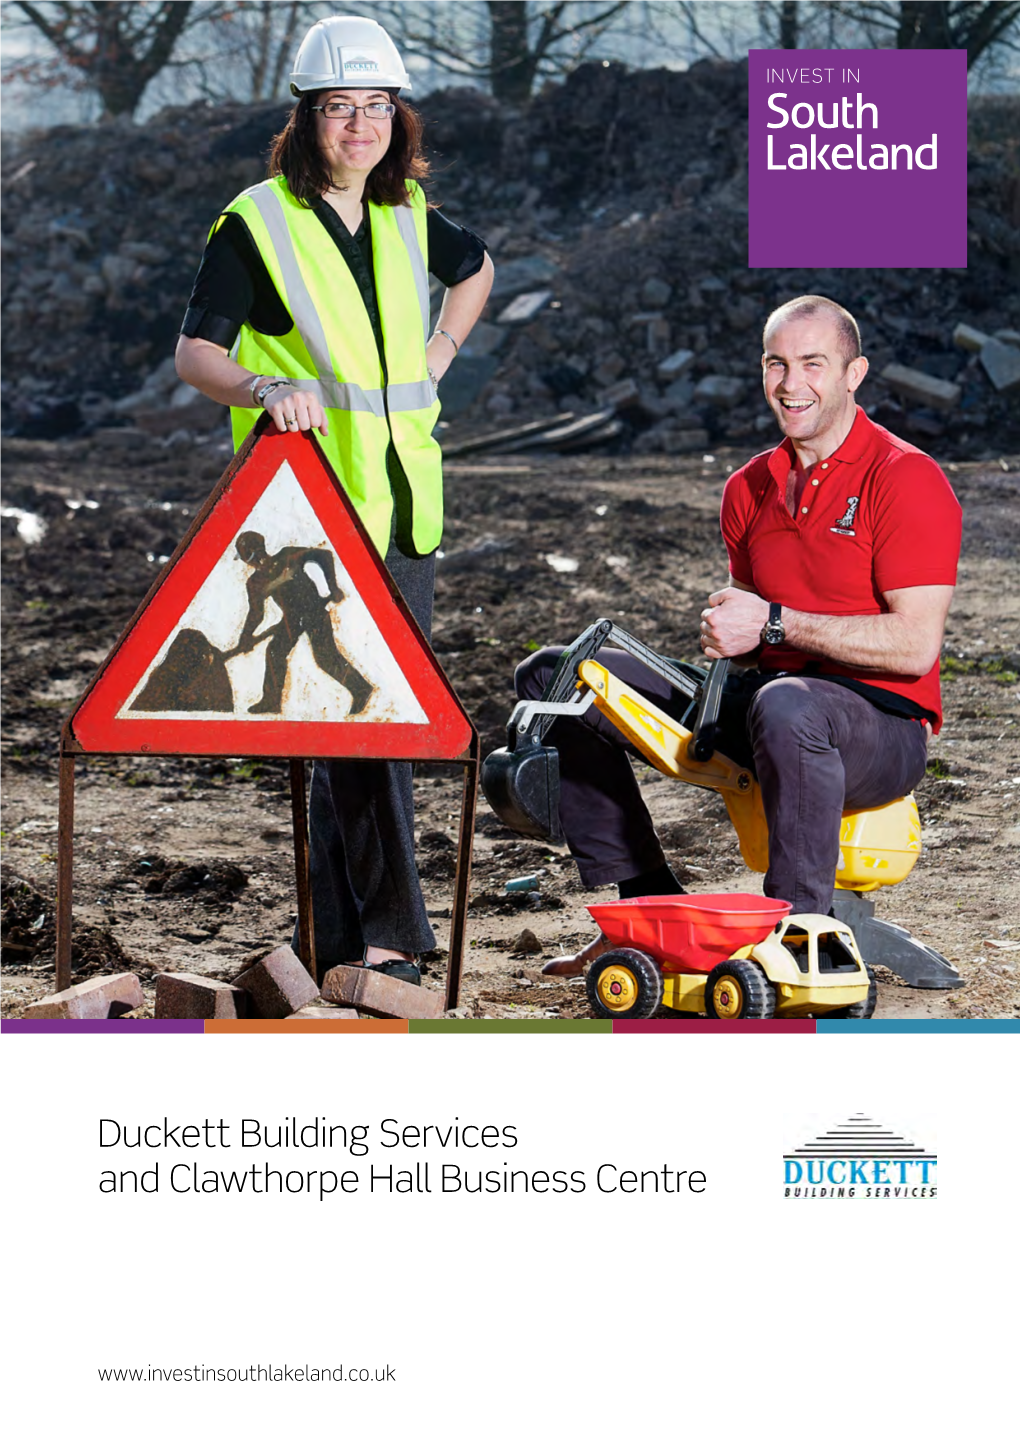 Duckett Building Services and Clawthorpe Hall Business Centre